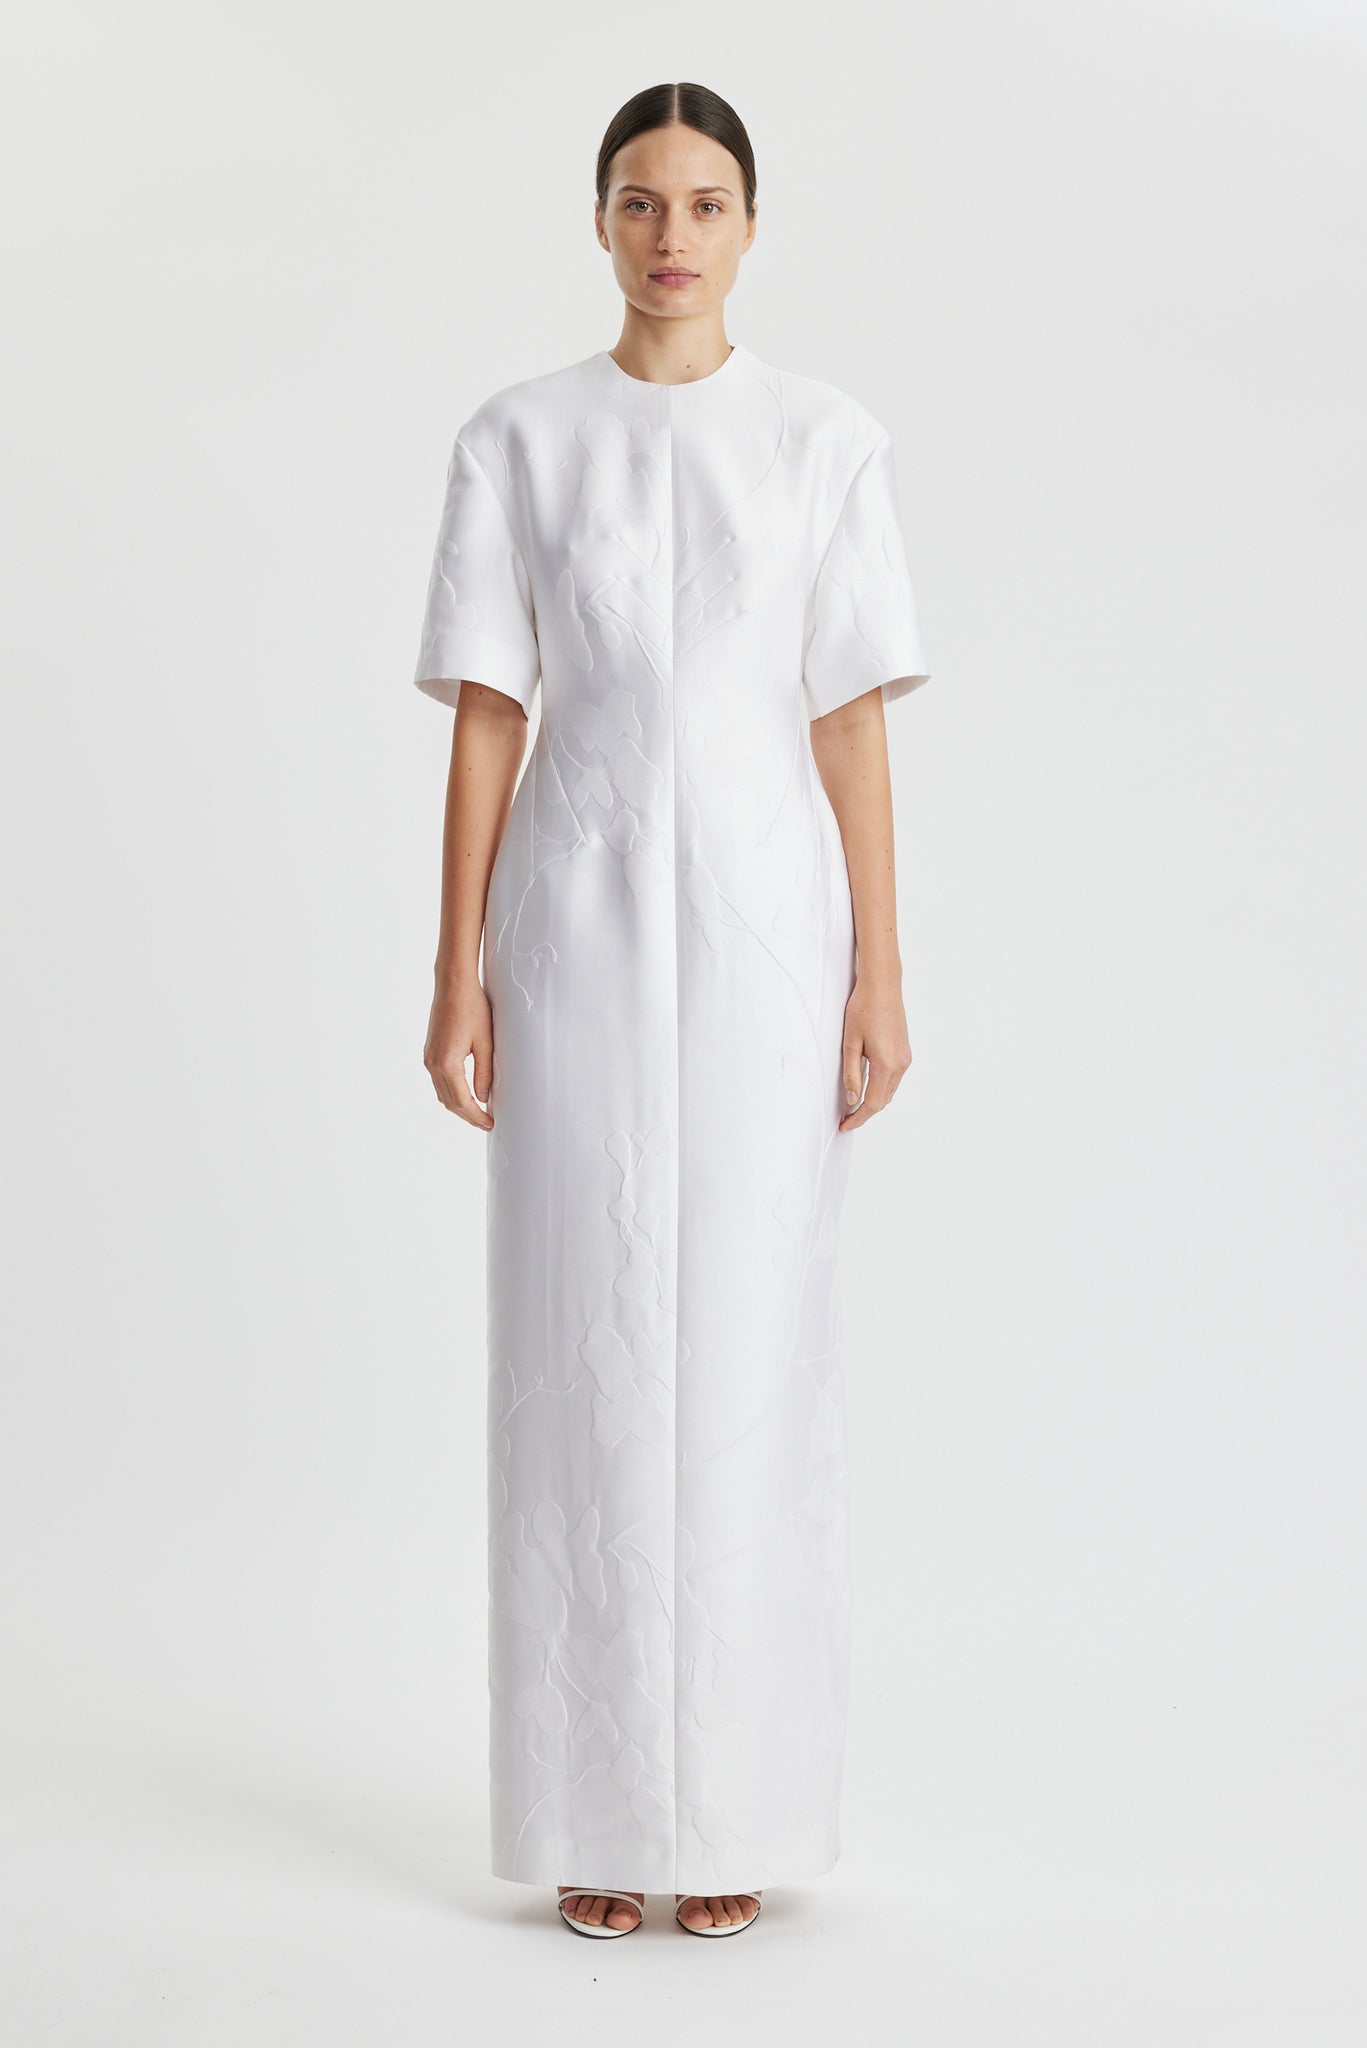 Sidres Dress In Optic White Embossed Cloque | Emilia WicksteadSidres Dress In Optic White Embossed Cloque | Emilia Wickstead